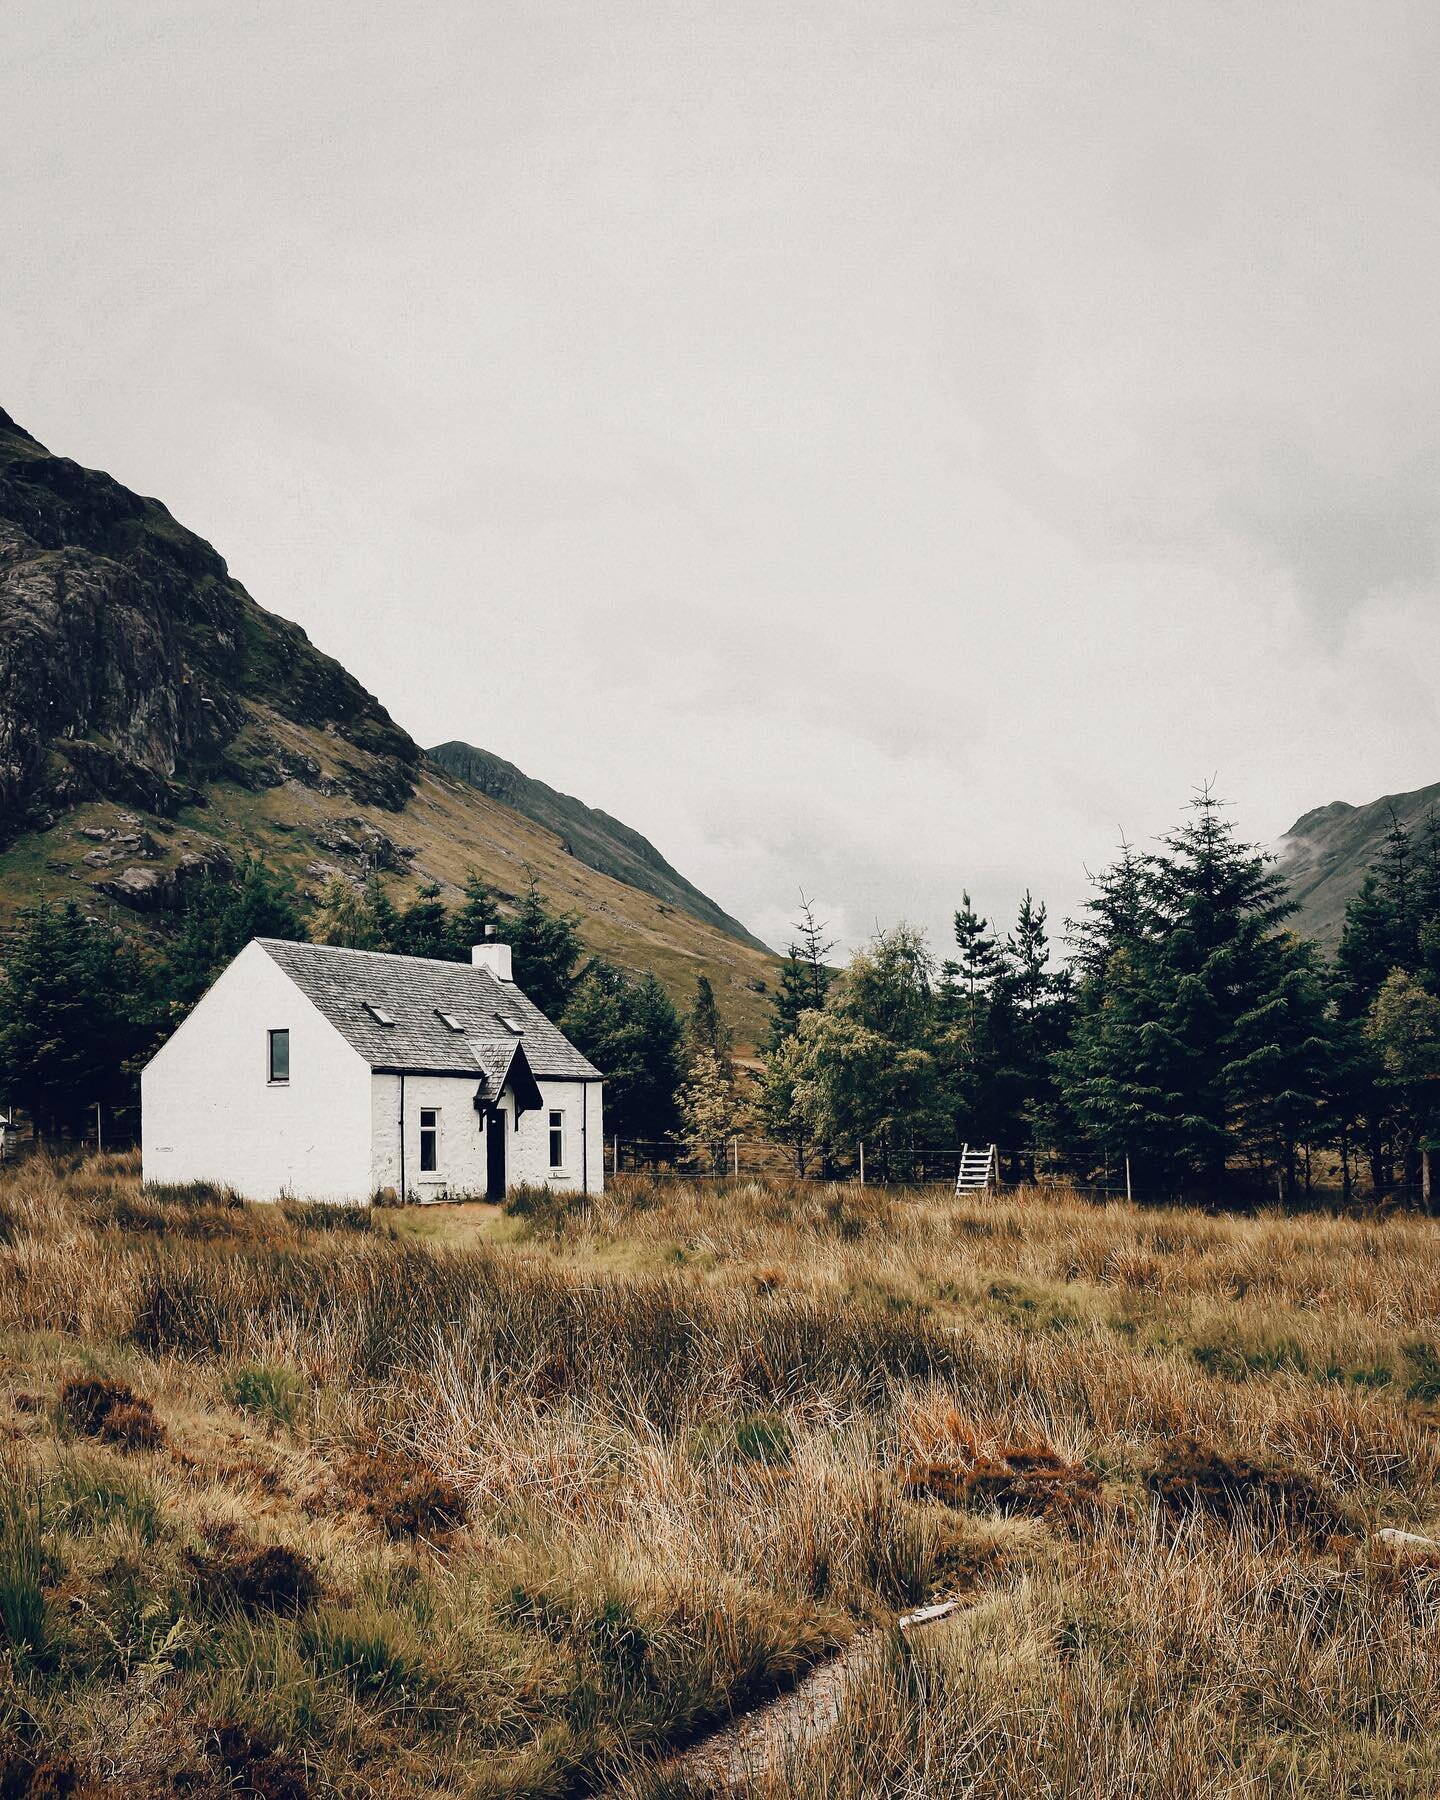 One from last summer in Glencoe. We&rsquo;re planning another summer in the UK, I think, even though travel is now more possible. It all just seems like the opposite of relaxing, but maybe that&rsquo;s just me? Anyone else staycationing this year?
.
